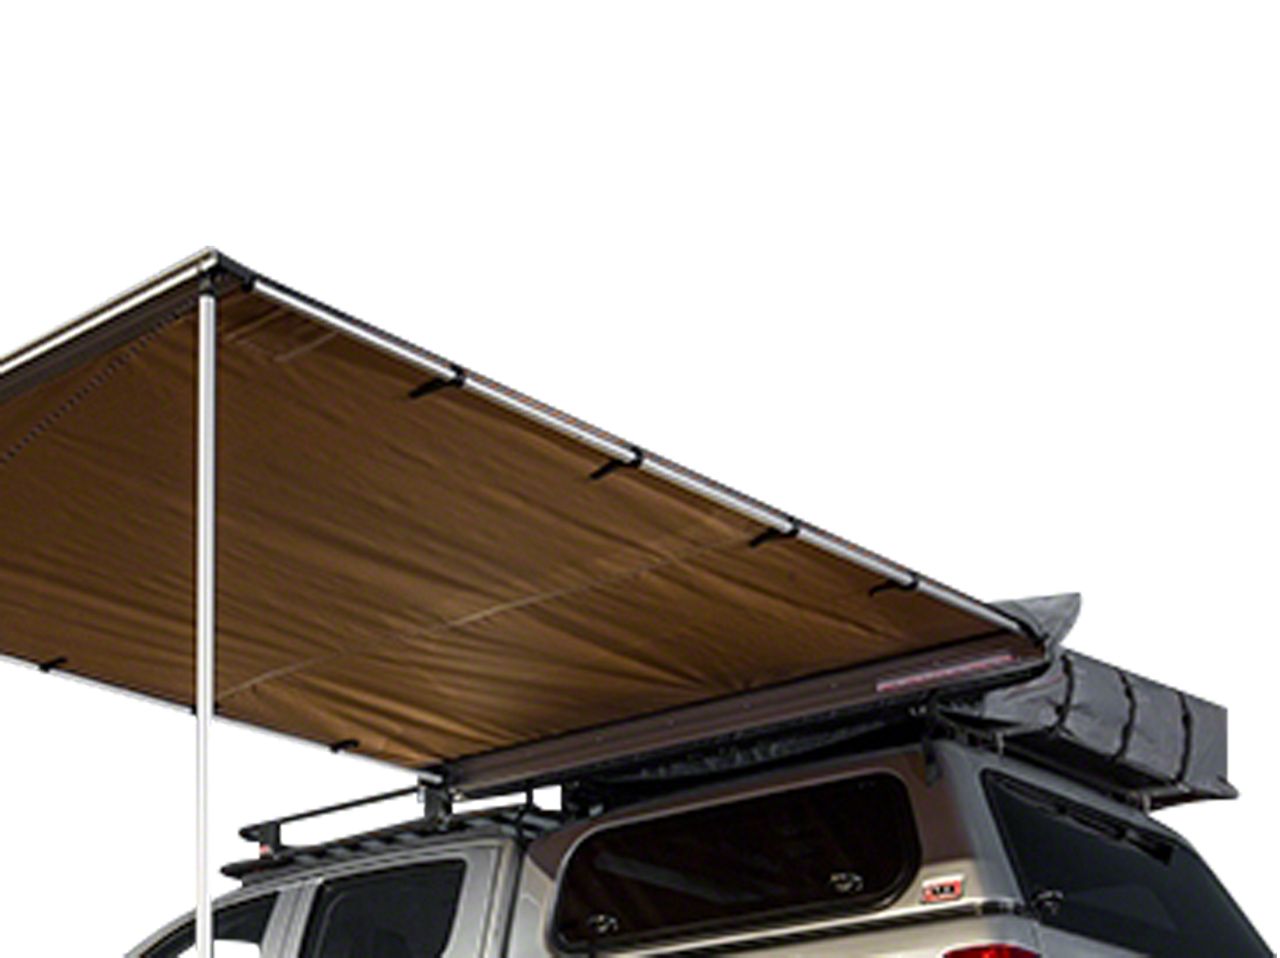 Ram 1500 Roof Top Tents & Camping Gear